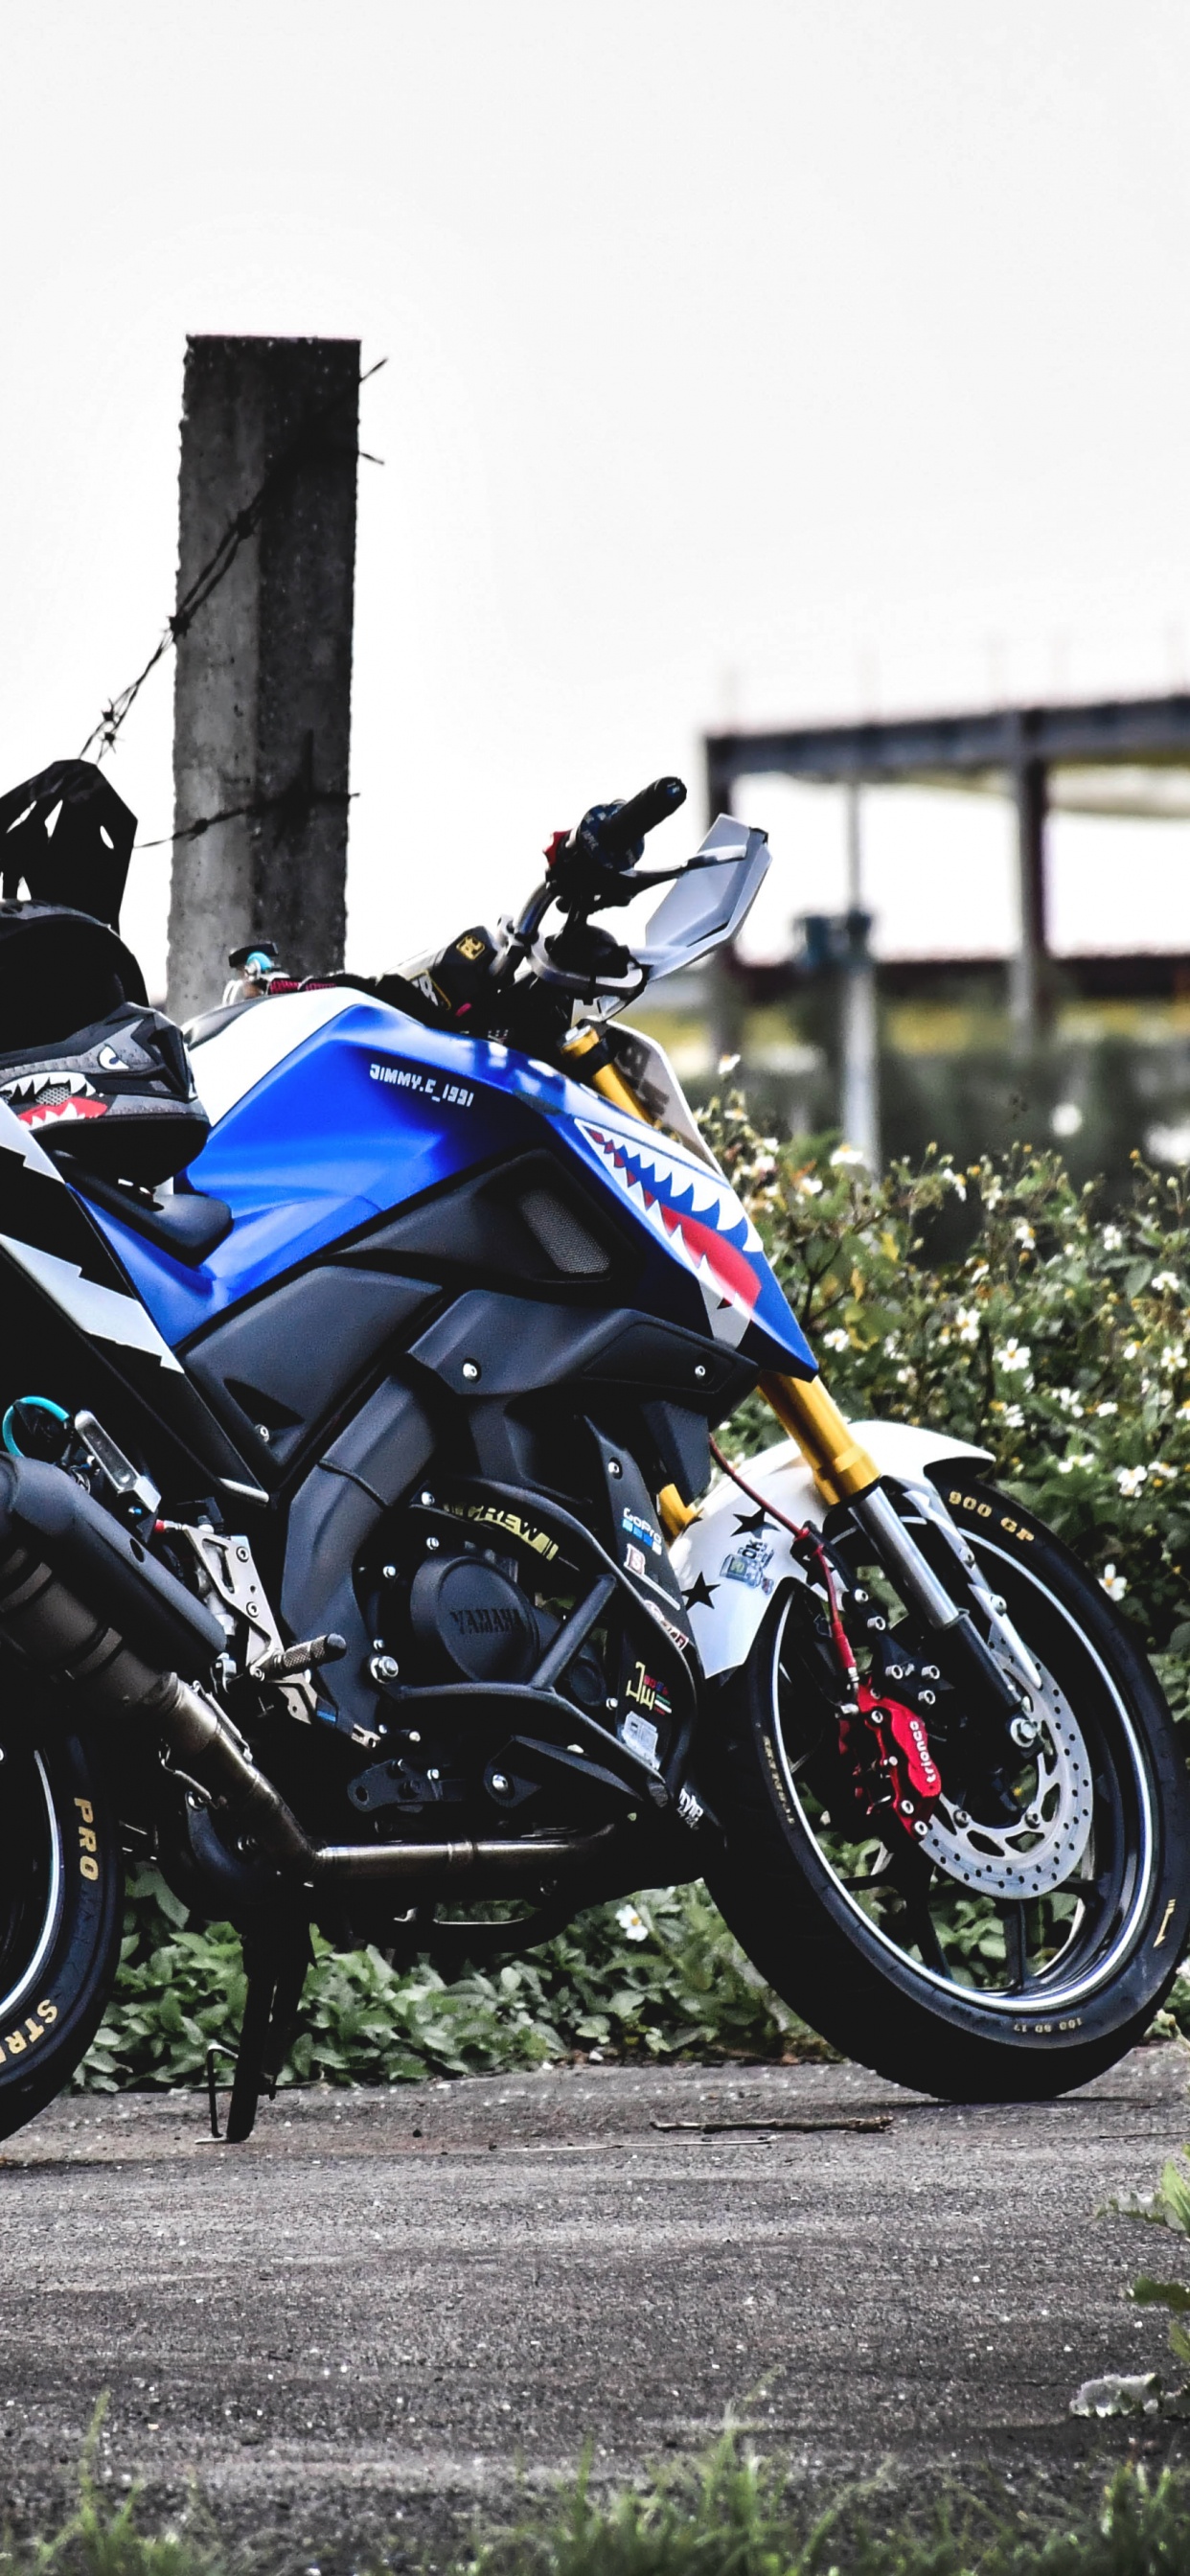 Black and Blue Sports Bike Parked on Gray Concrete Road During Daytime. Wallpaper in 1242x2688 Resolution